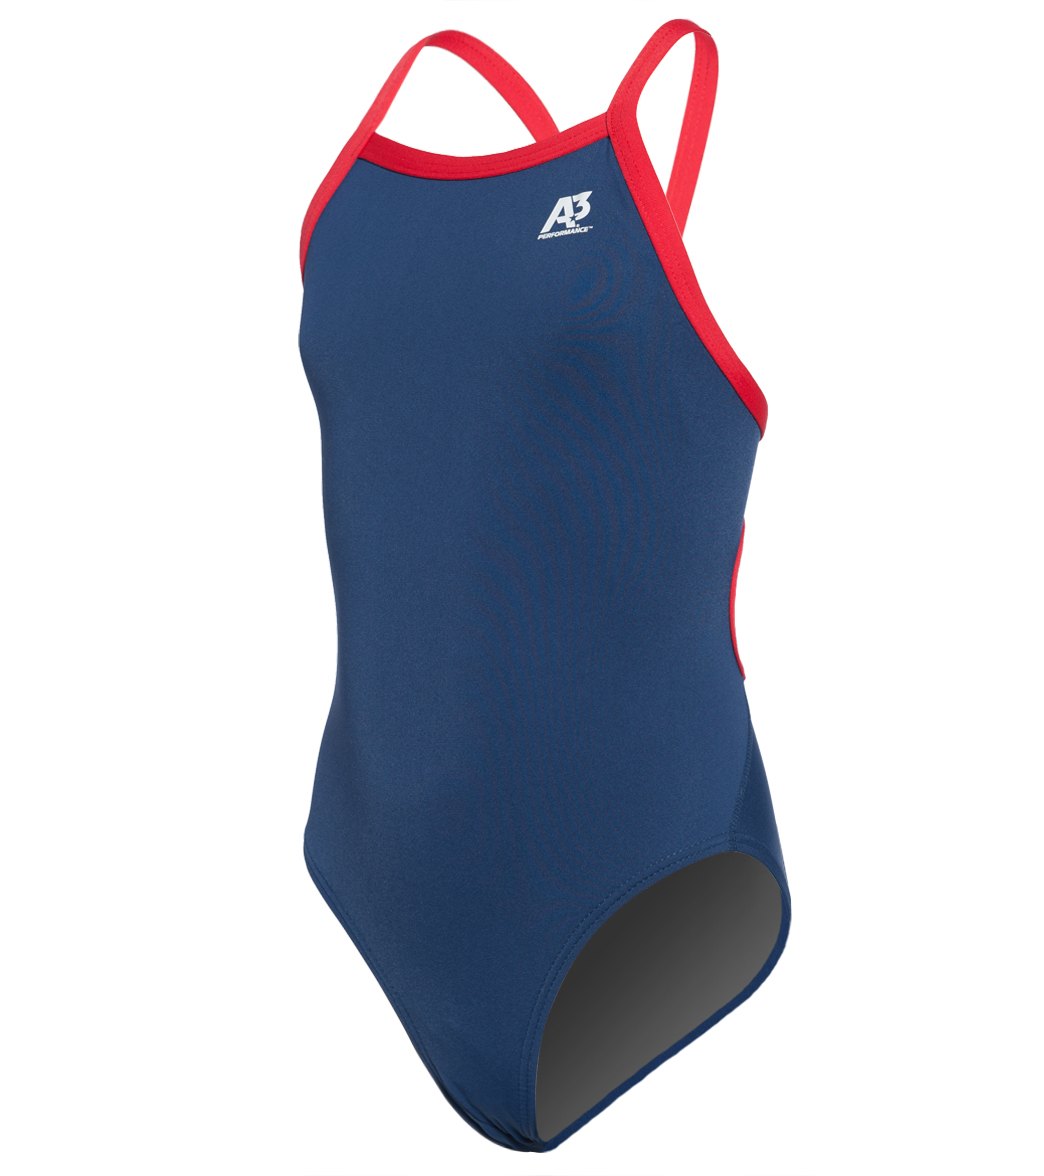 A3 Performance Female Youth X-Back Poly Swimsuit W/ Contrast Trim - Navy/Red 22 Polyester/Pbt - Swimoutlet.com